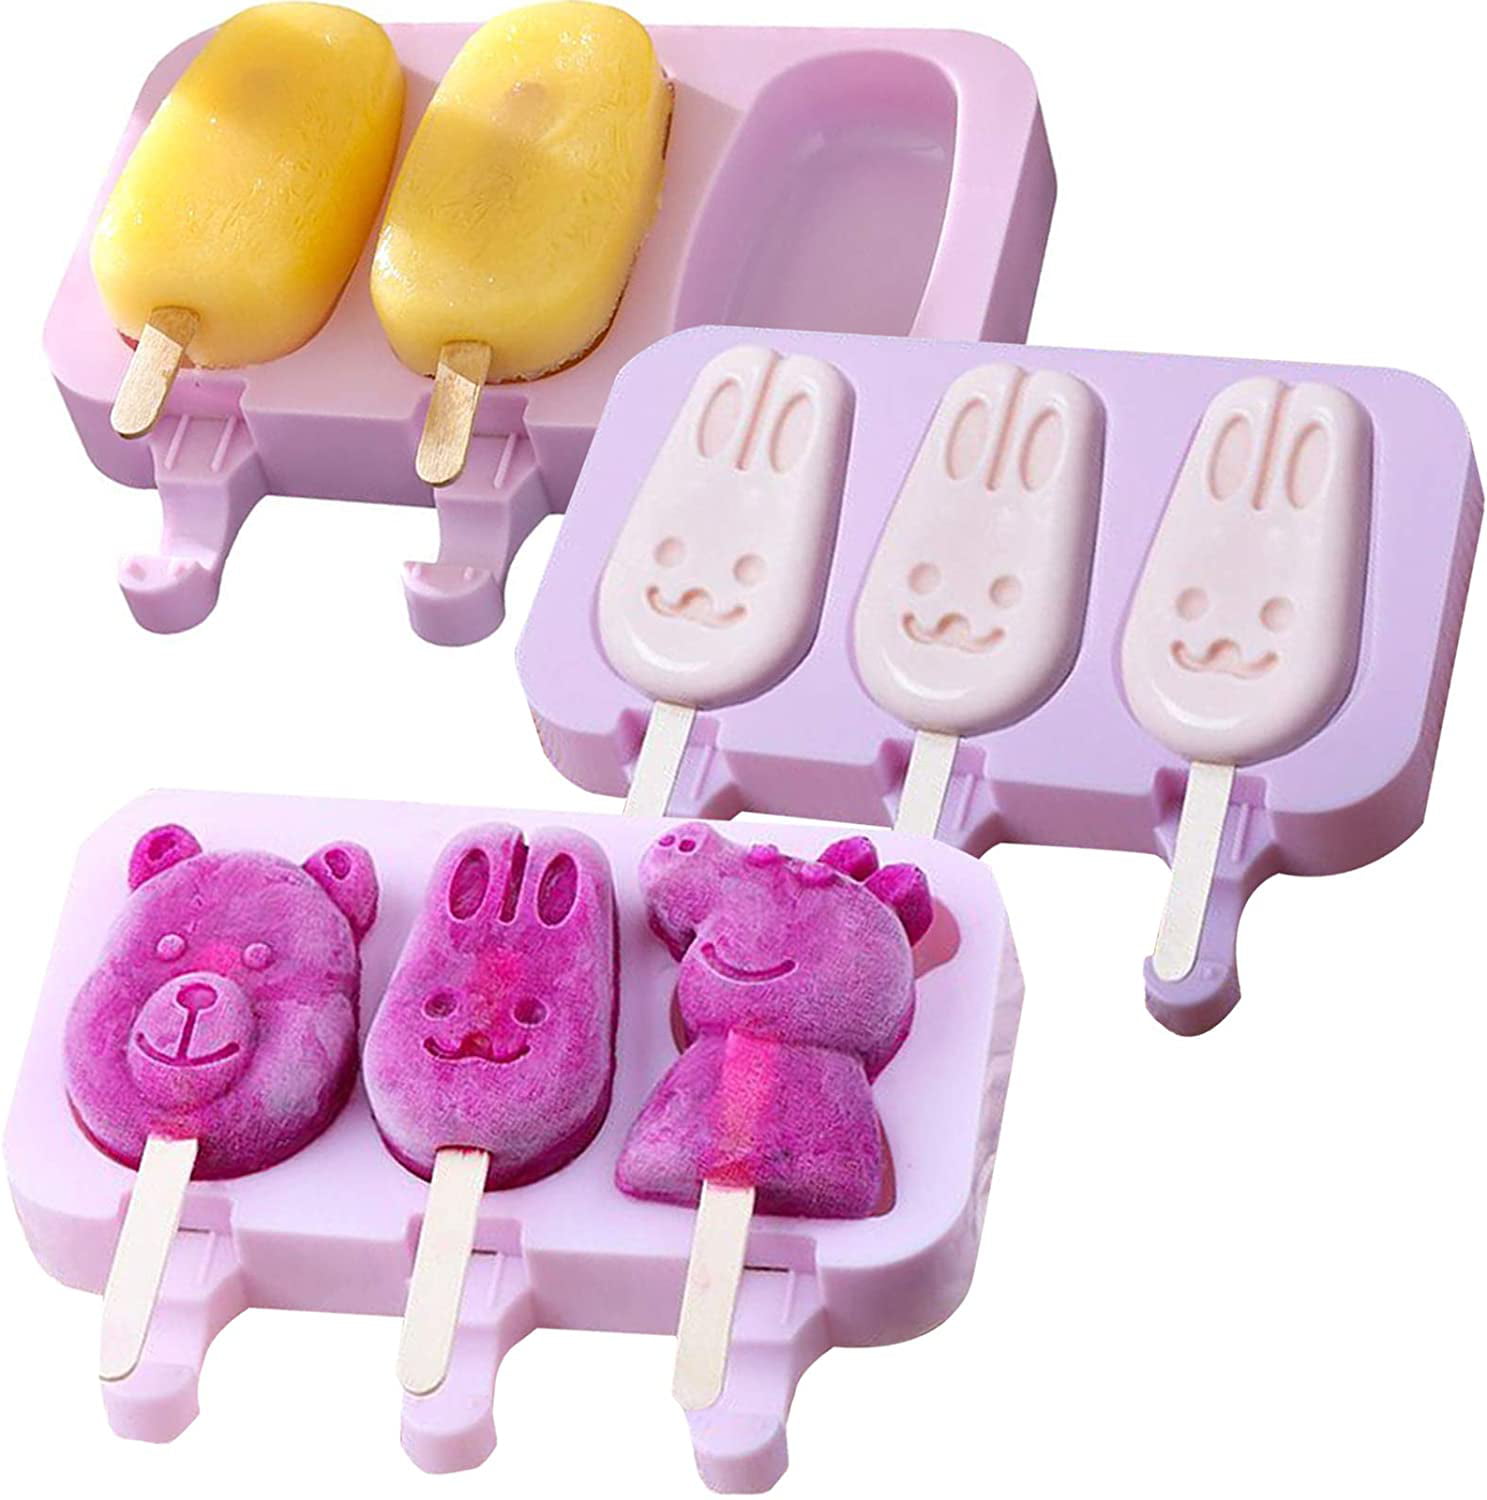 Silicone Ice Cream Mold Frozen Ice Lolly Maker Mould Tray  DIY Juice Popsicle